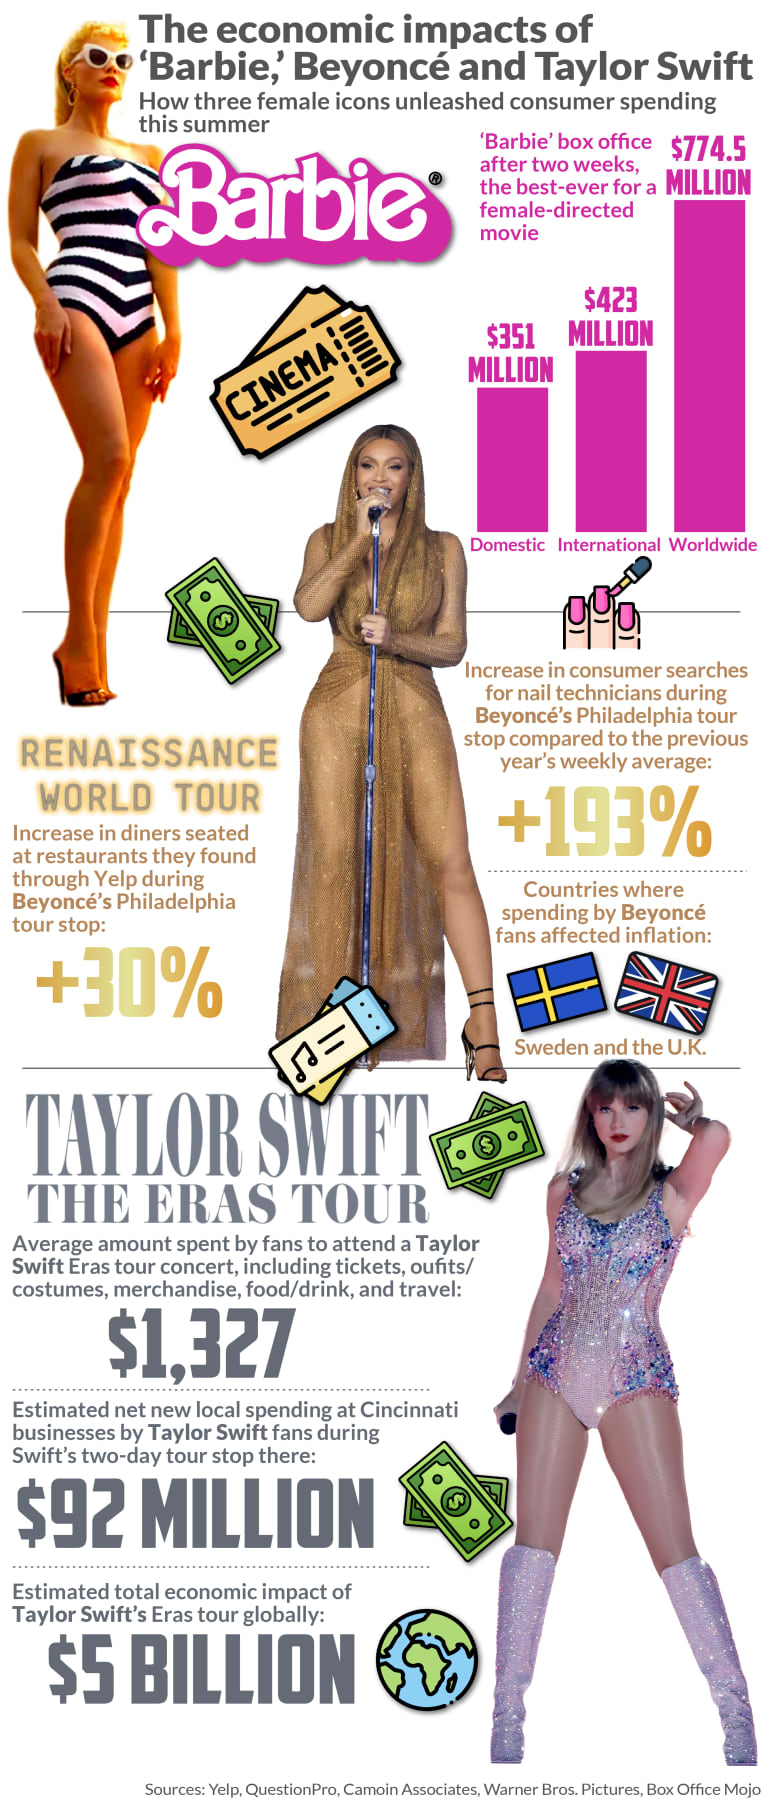 Calling all fellow Swifties and Stanley fans!! Eras tour Stanley